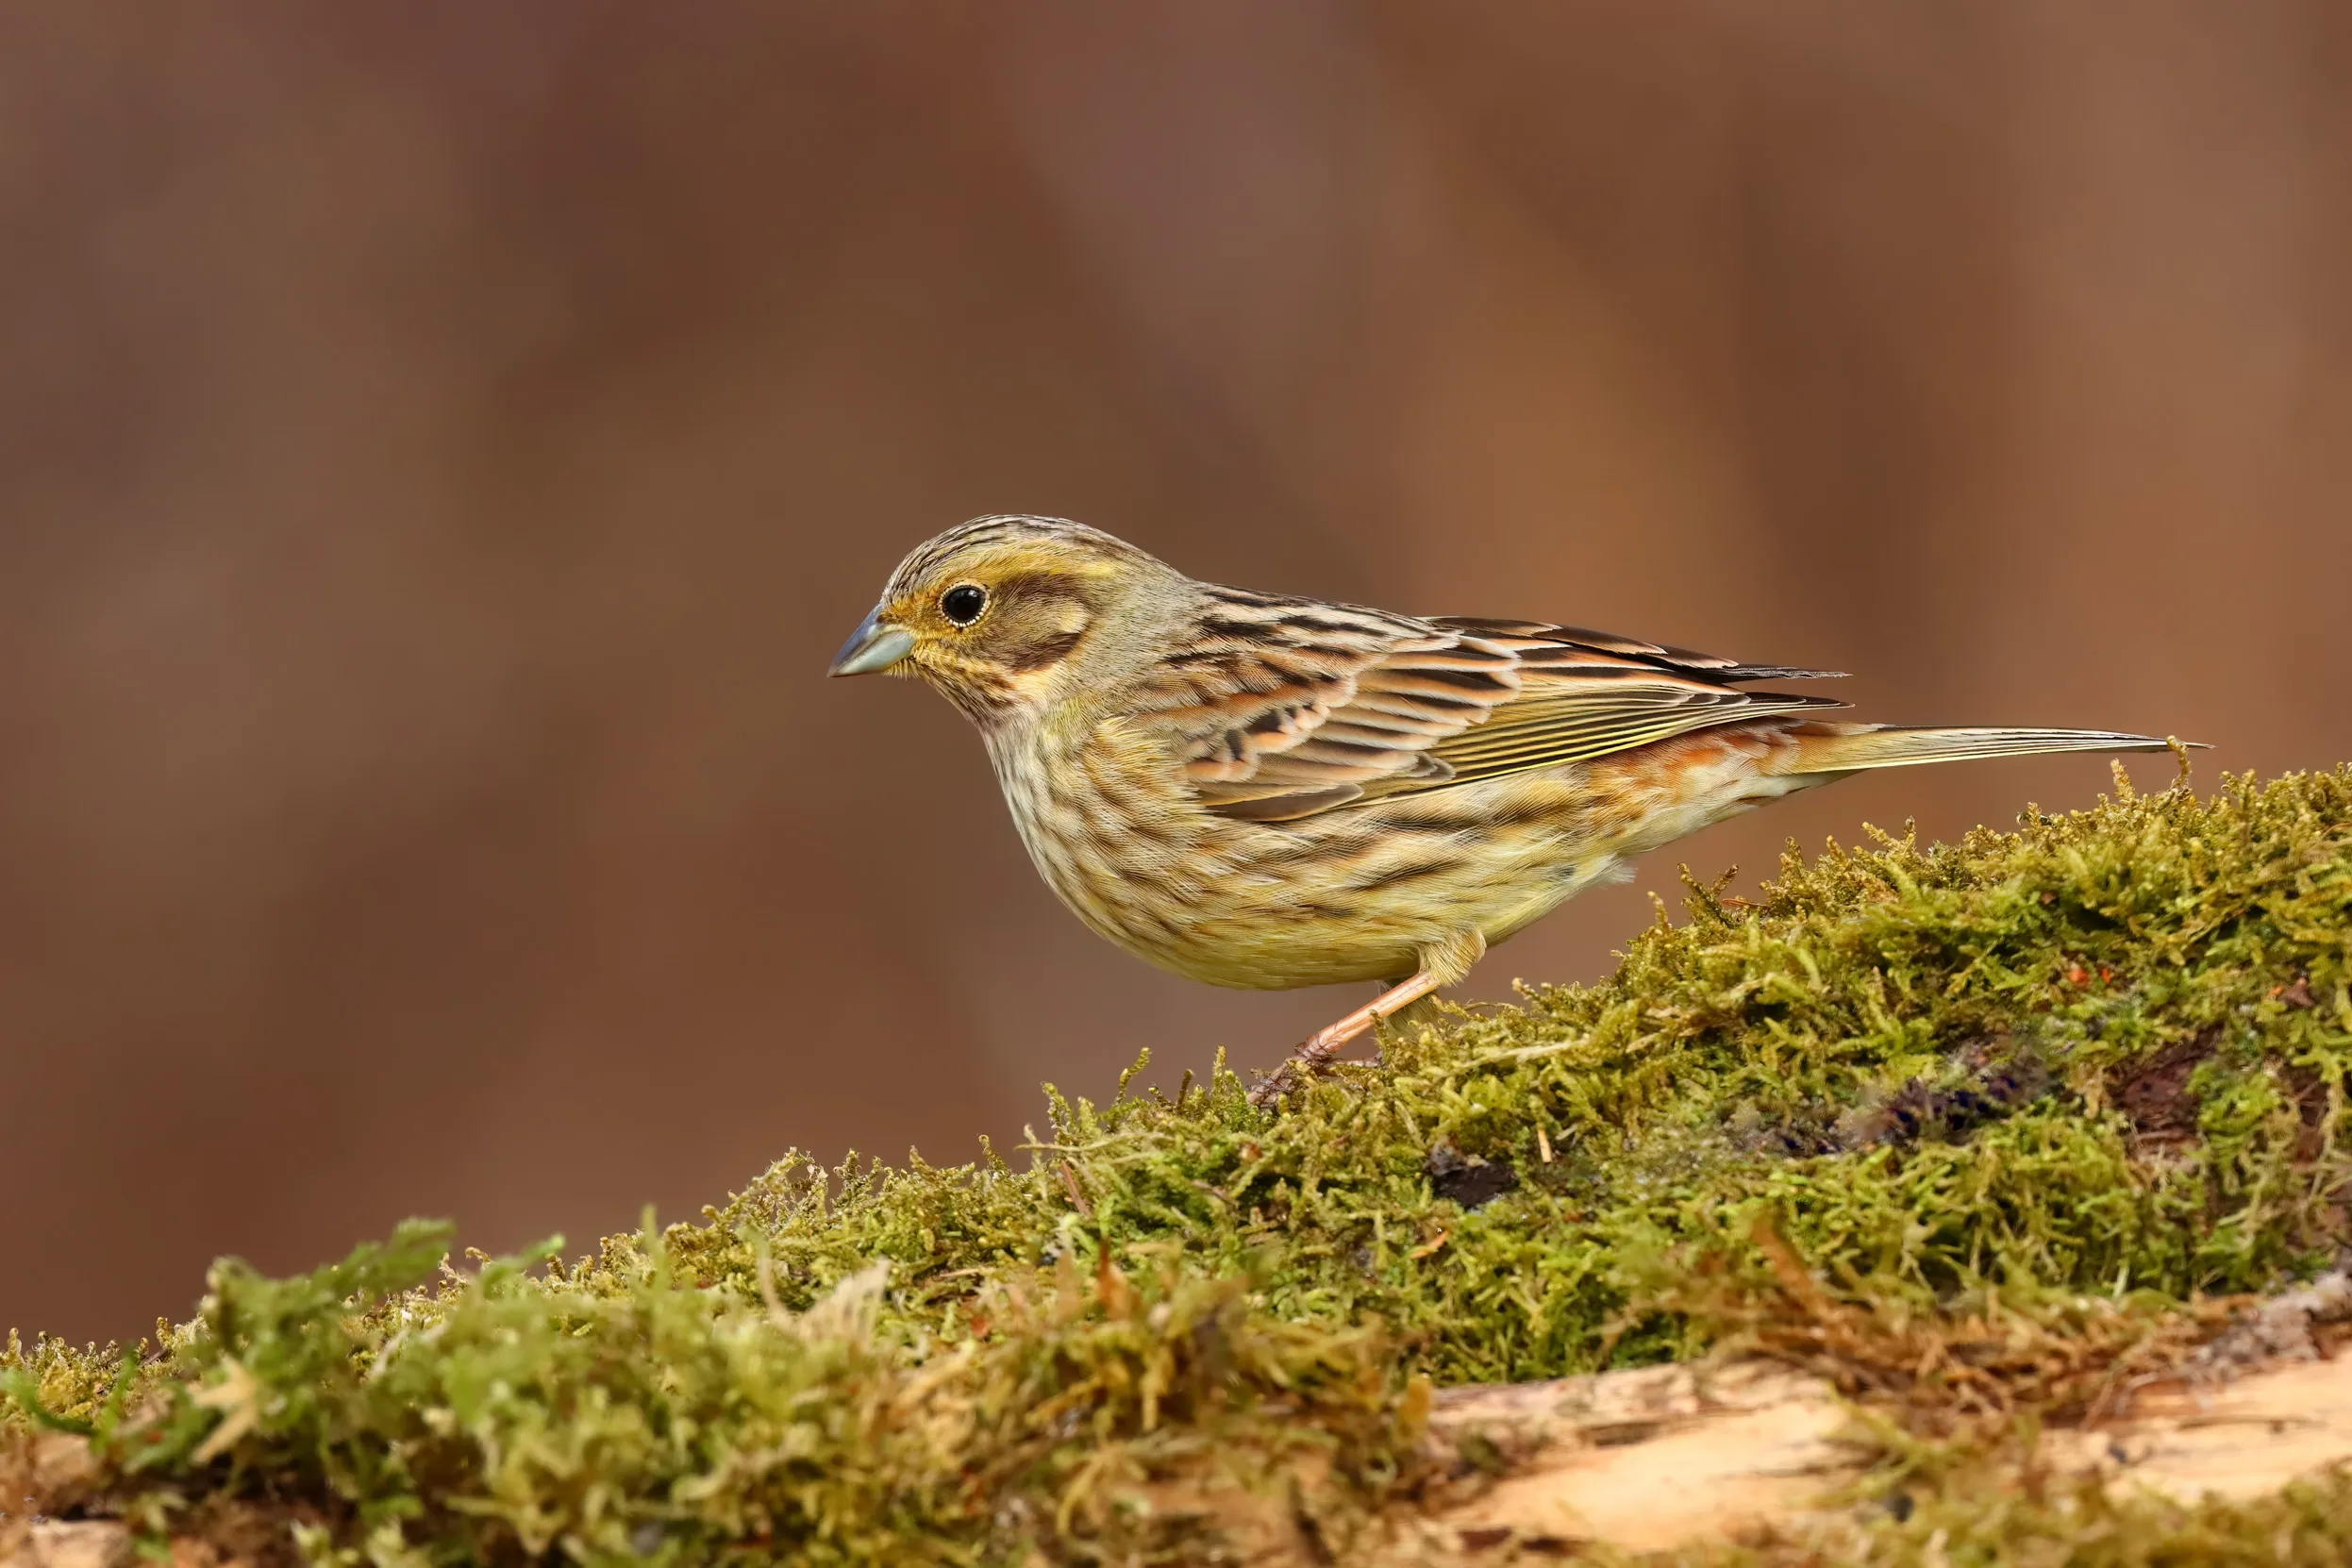 A female Yellowhammer stood on a moss covered log.